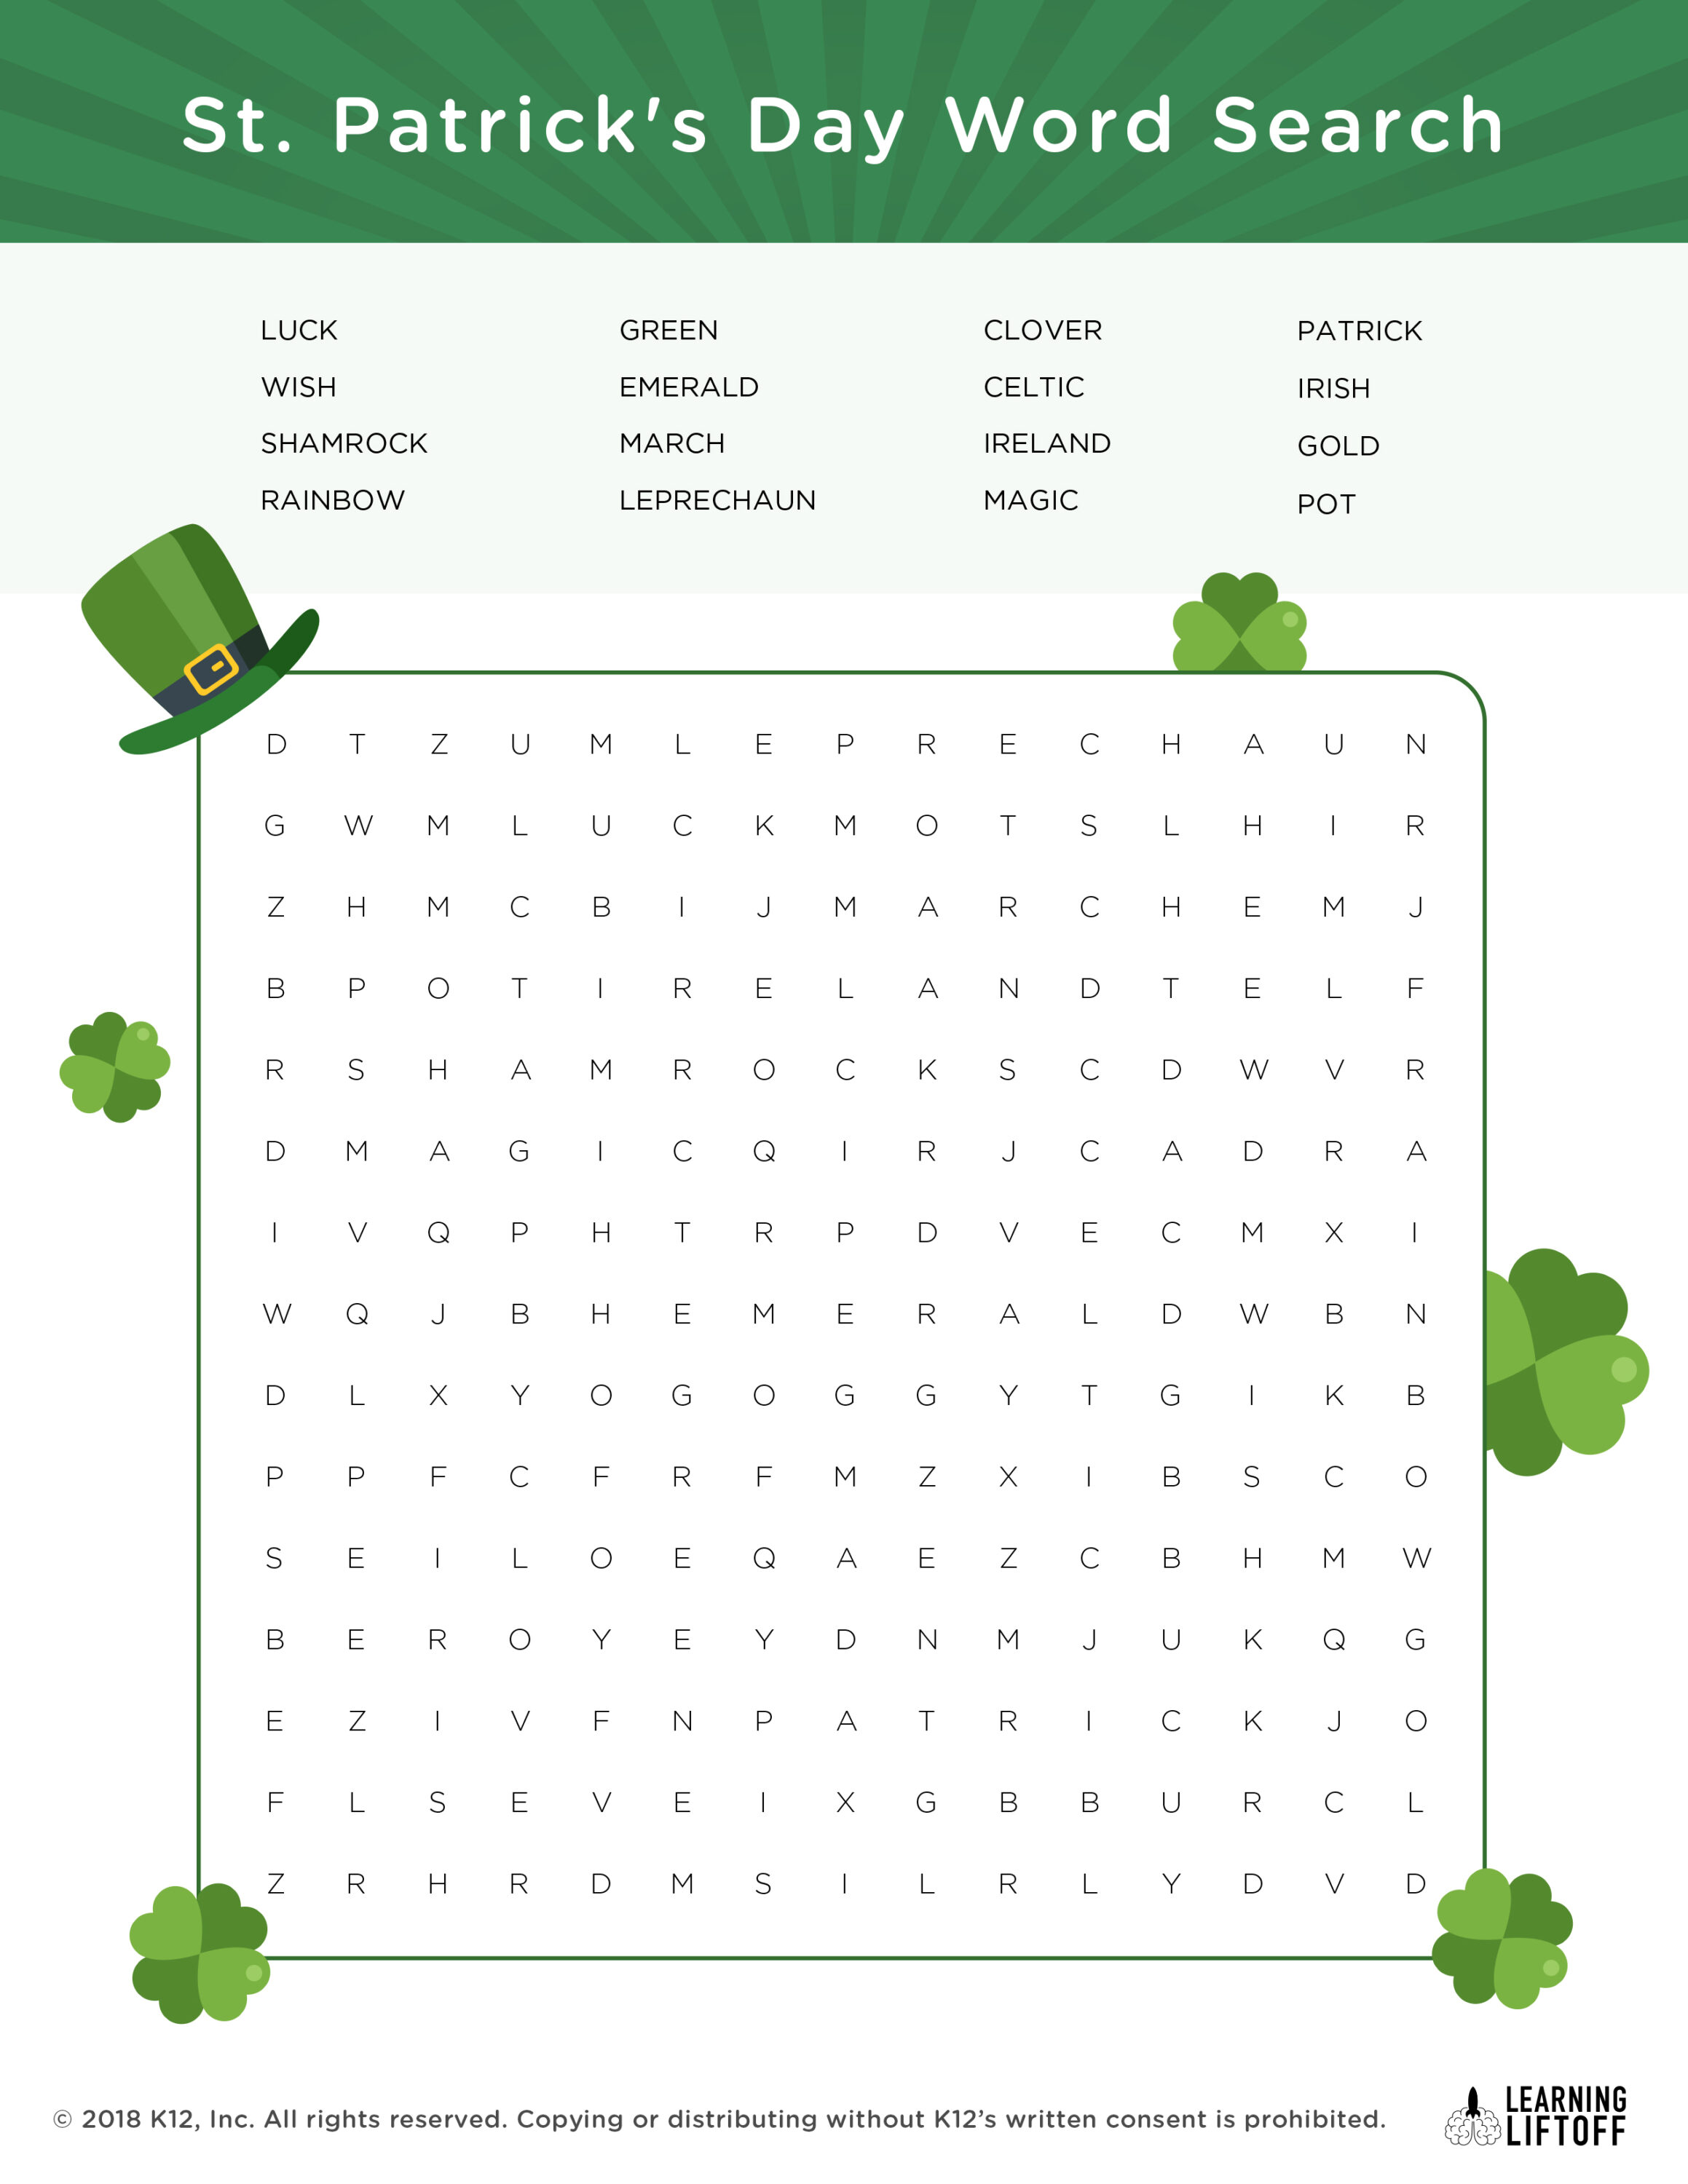 Celebrate St. Patrick’s Day with These Easy Crafts and Activities